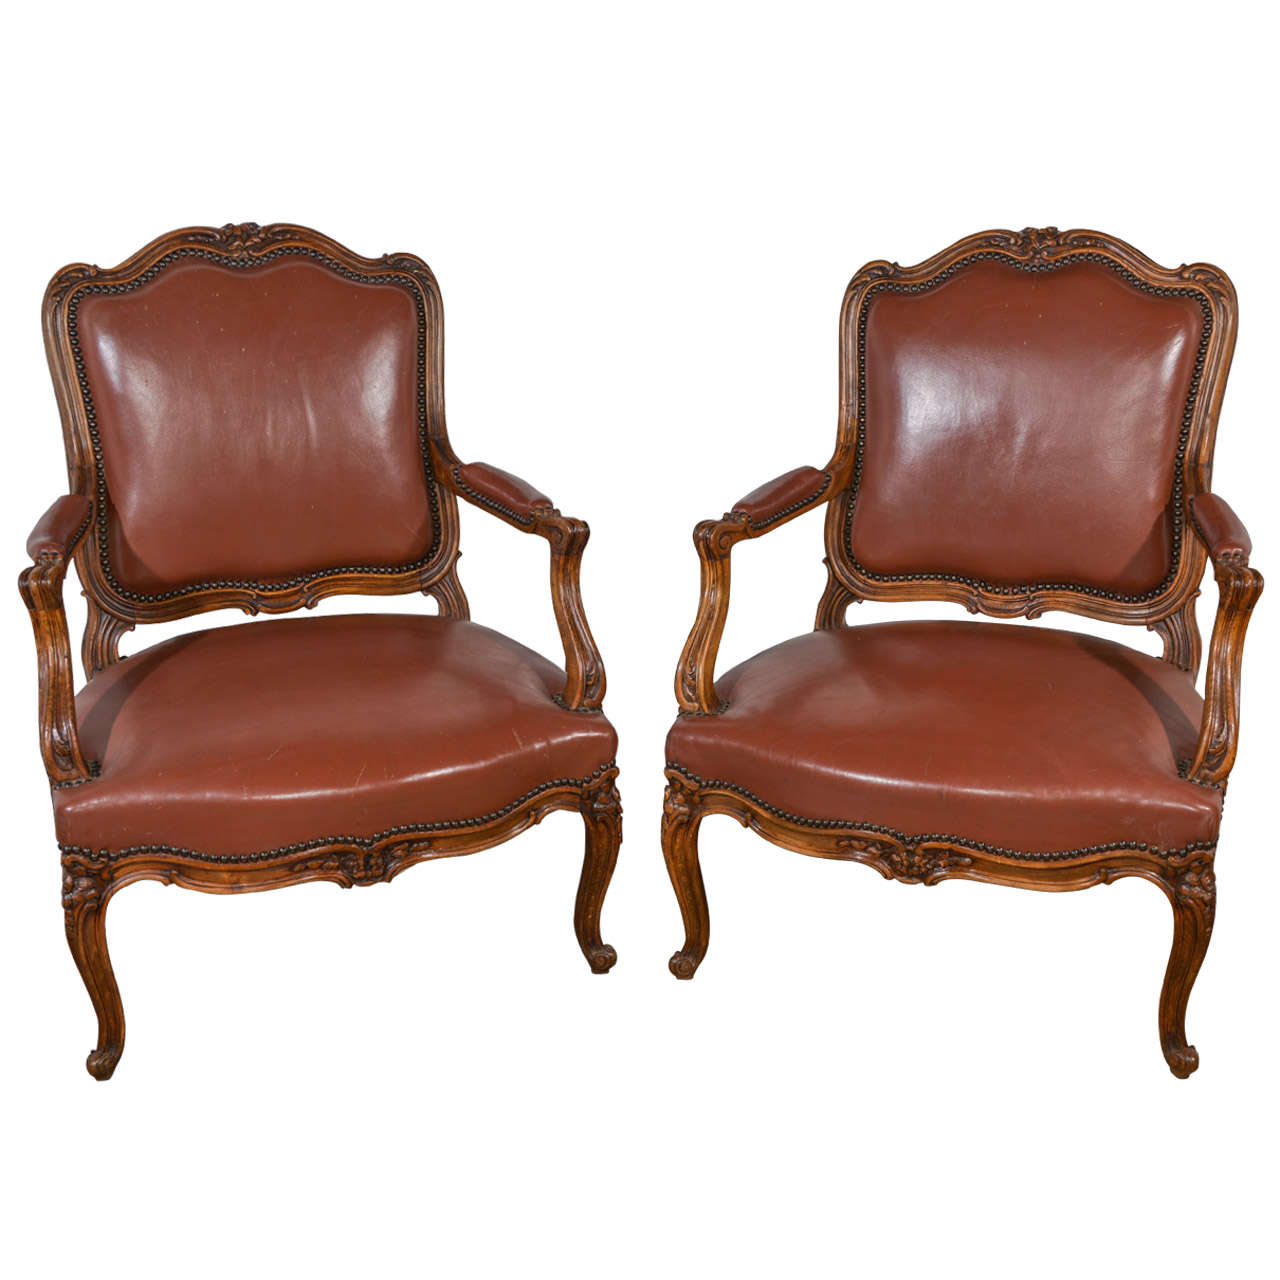 Pair of French Carved Chairs